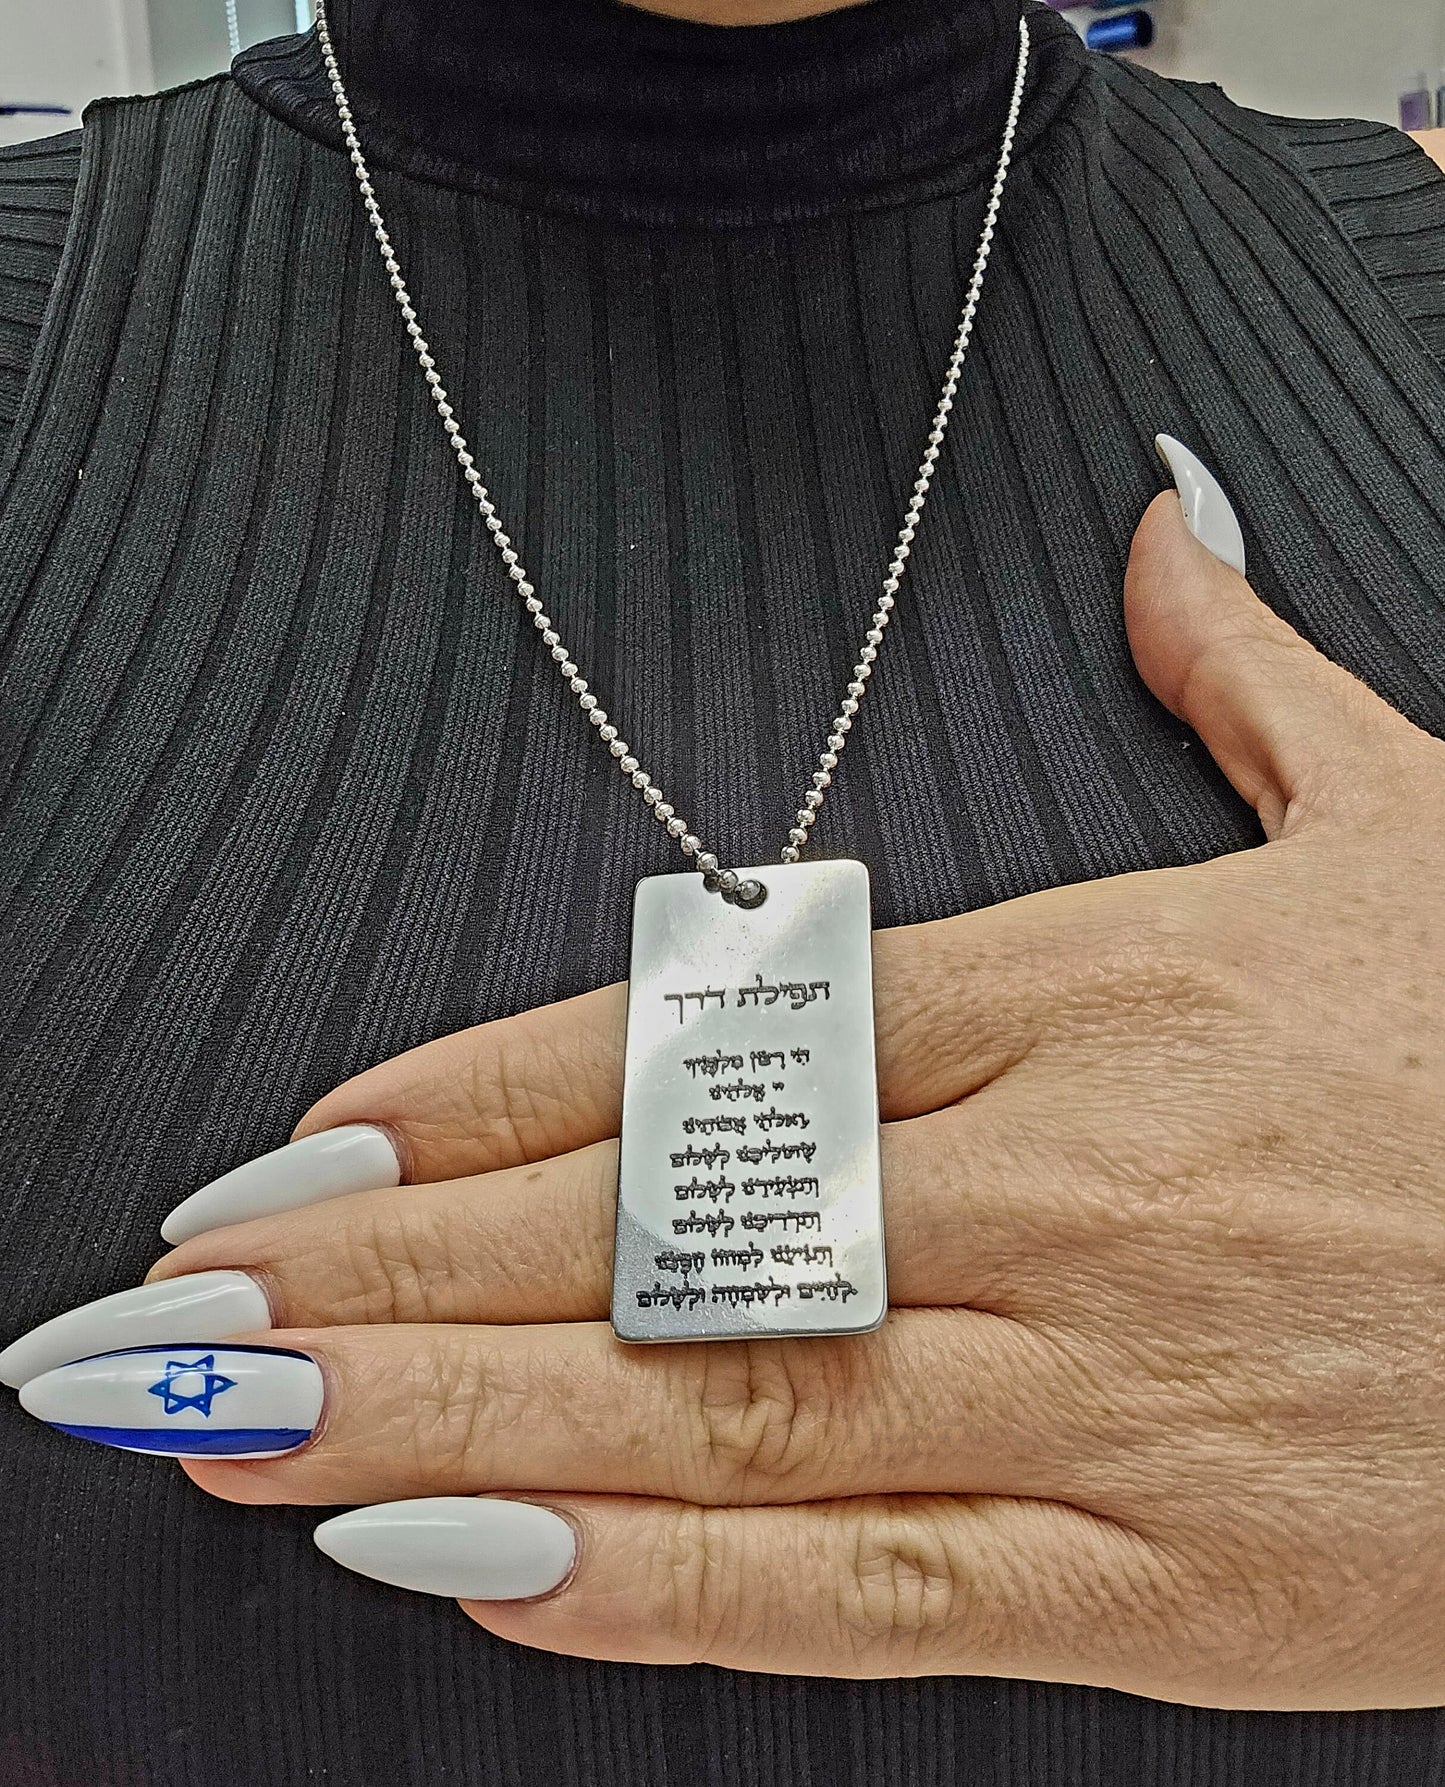 Custom stainless steel disc necklace engraved with Tfilat Haderech prayer and David Star.